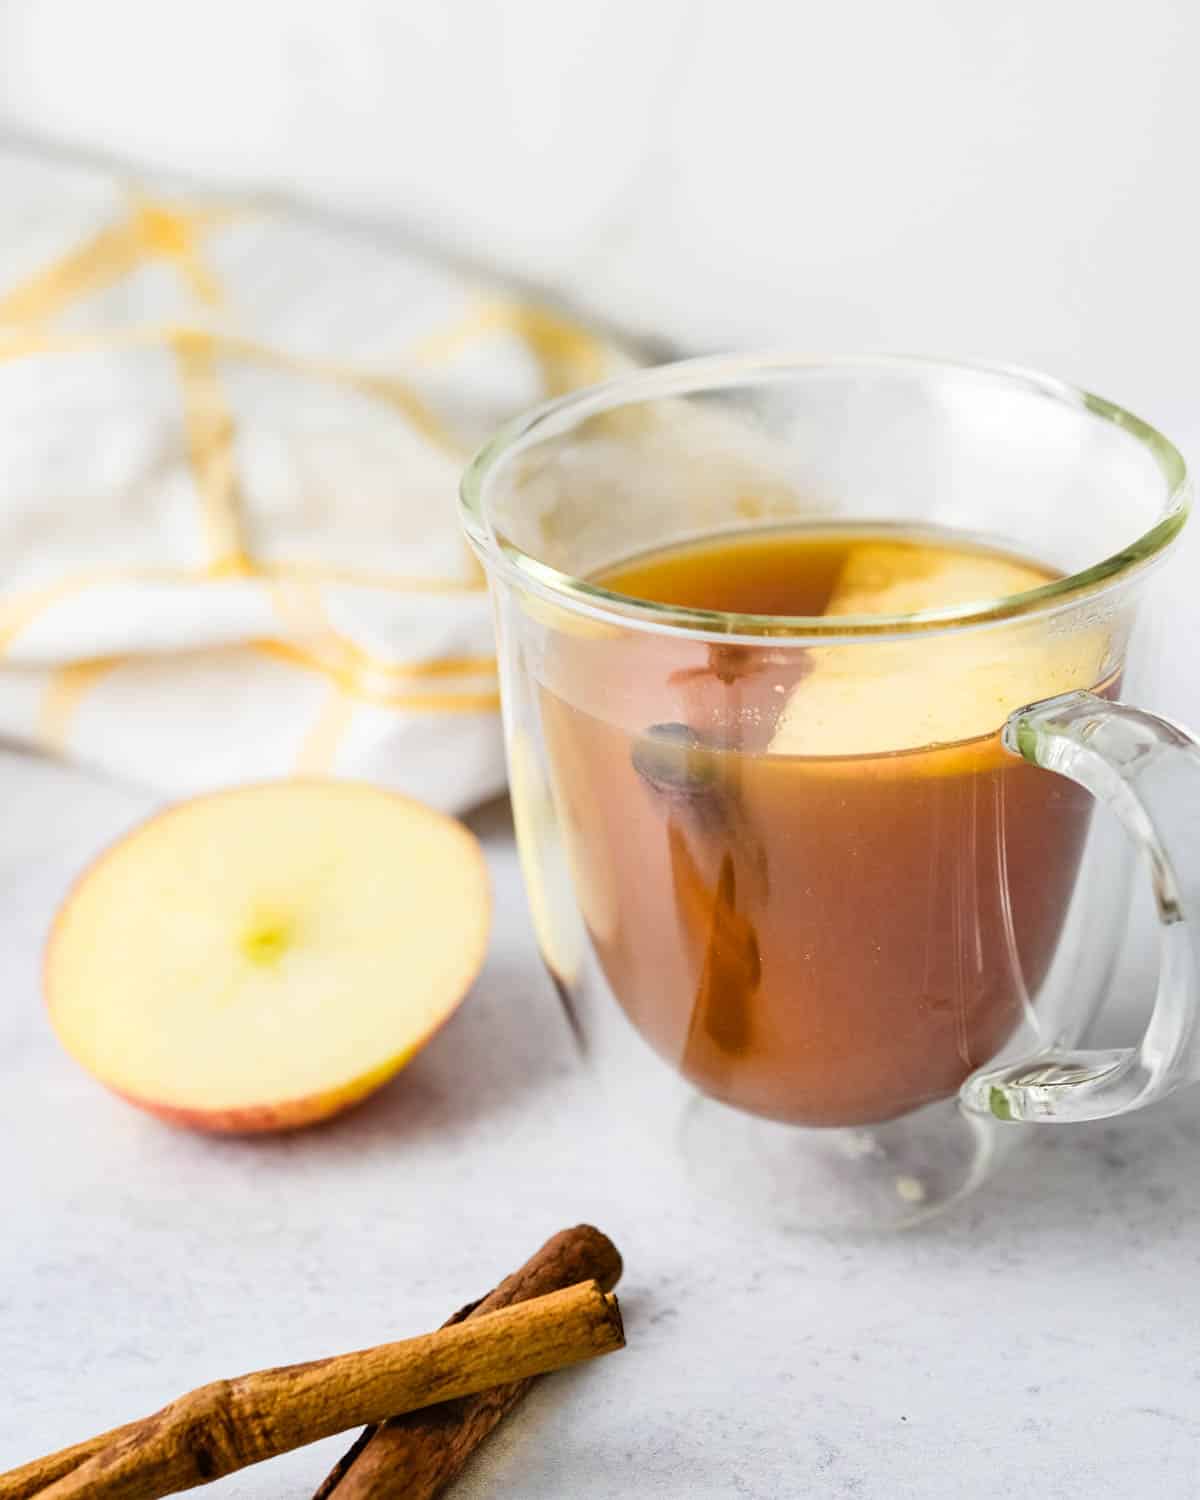 A cup of hot cider tea with a cinnamon stick and apple slice.